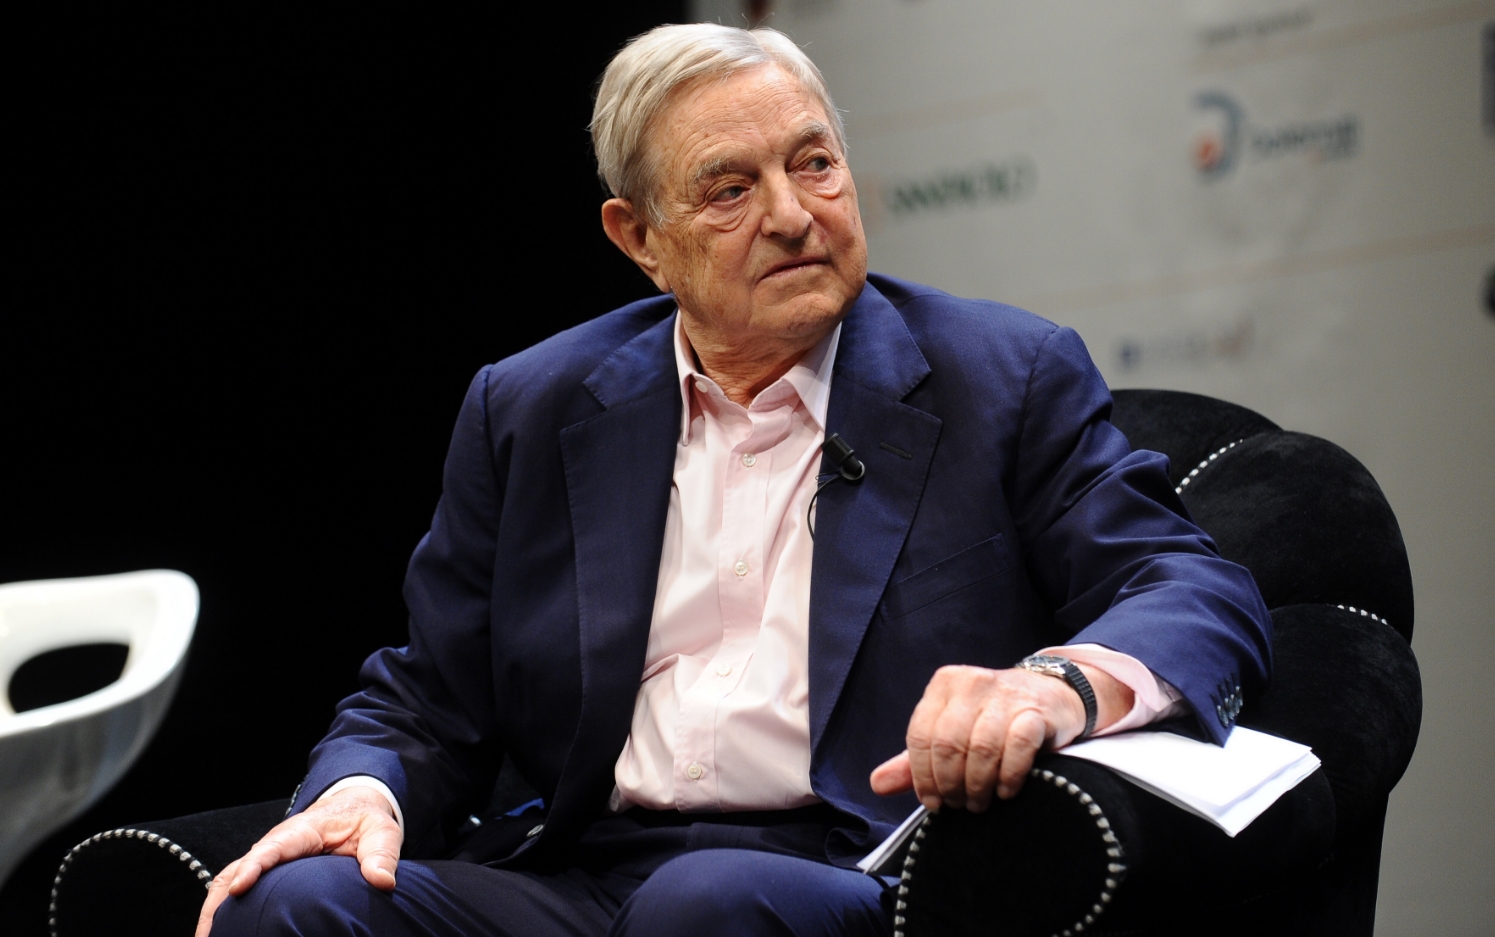 Image: Billionaires including George Soros establish “Good Information Inc.” in order to discredit sources who expose globalist lies